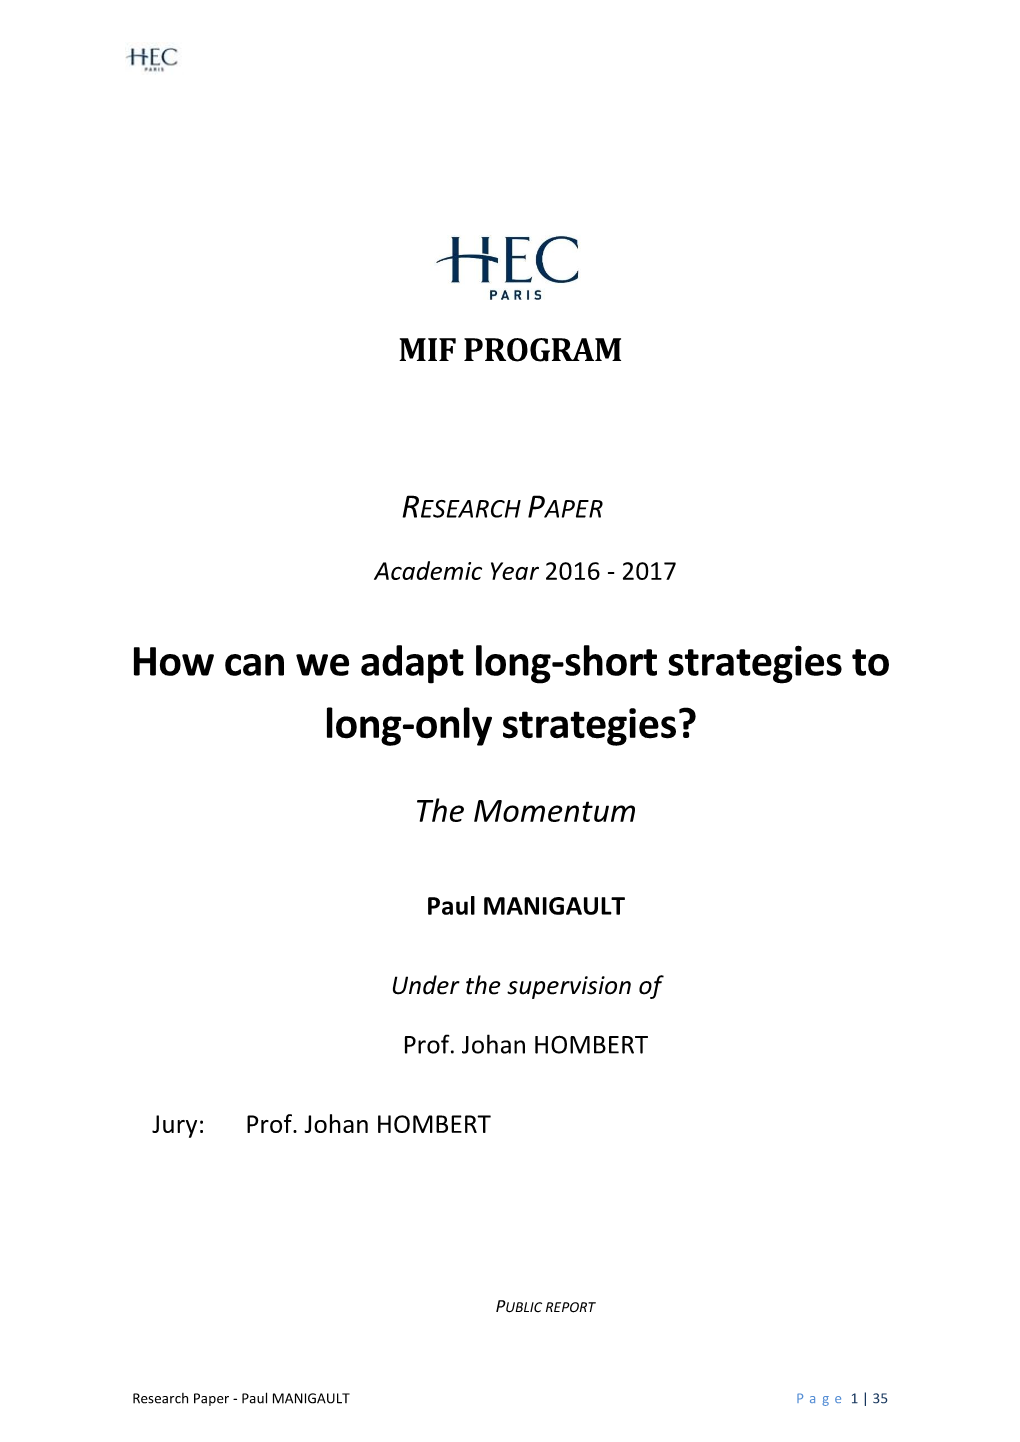 How Can We Adapt Long-Short Strategies to Long-Only Strategies?